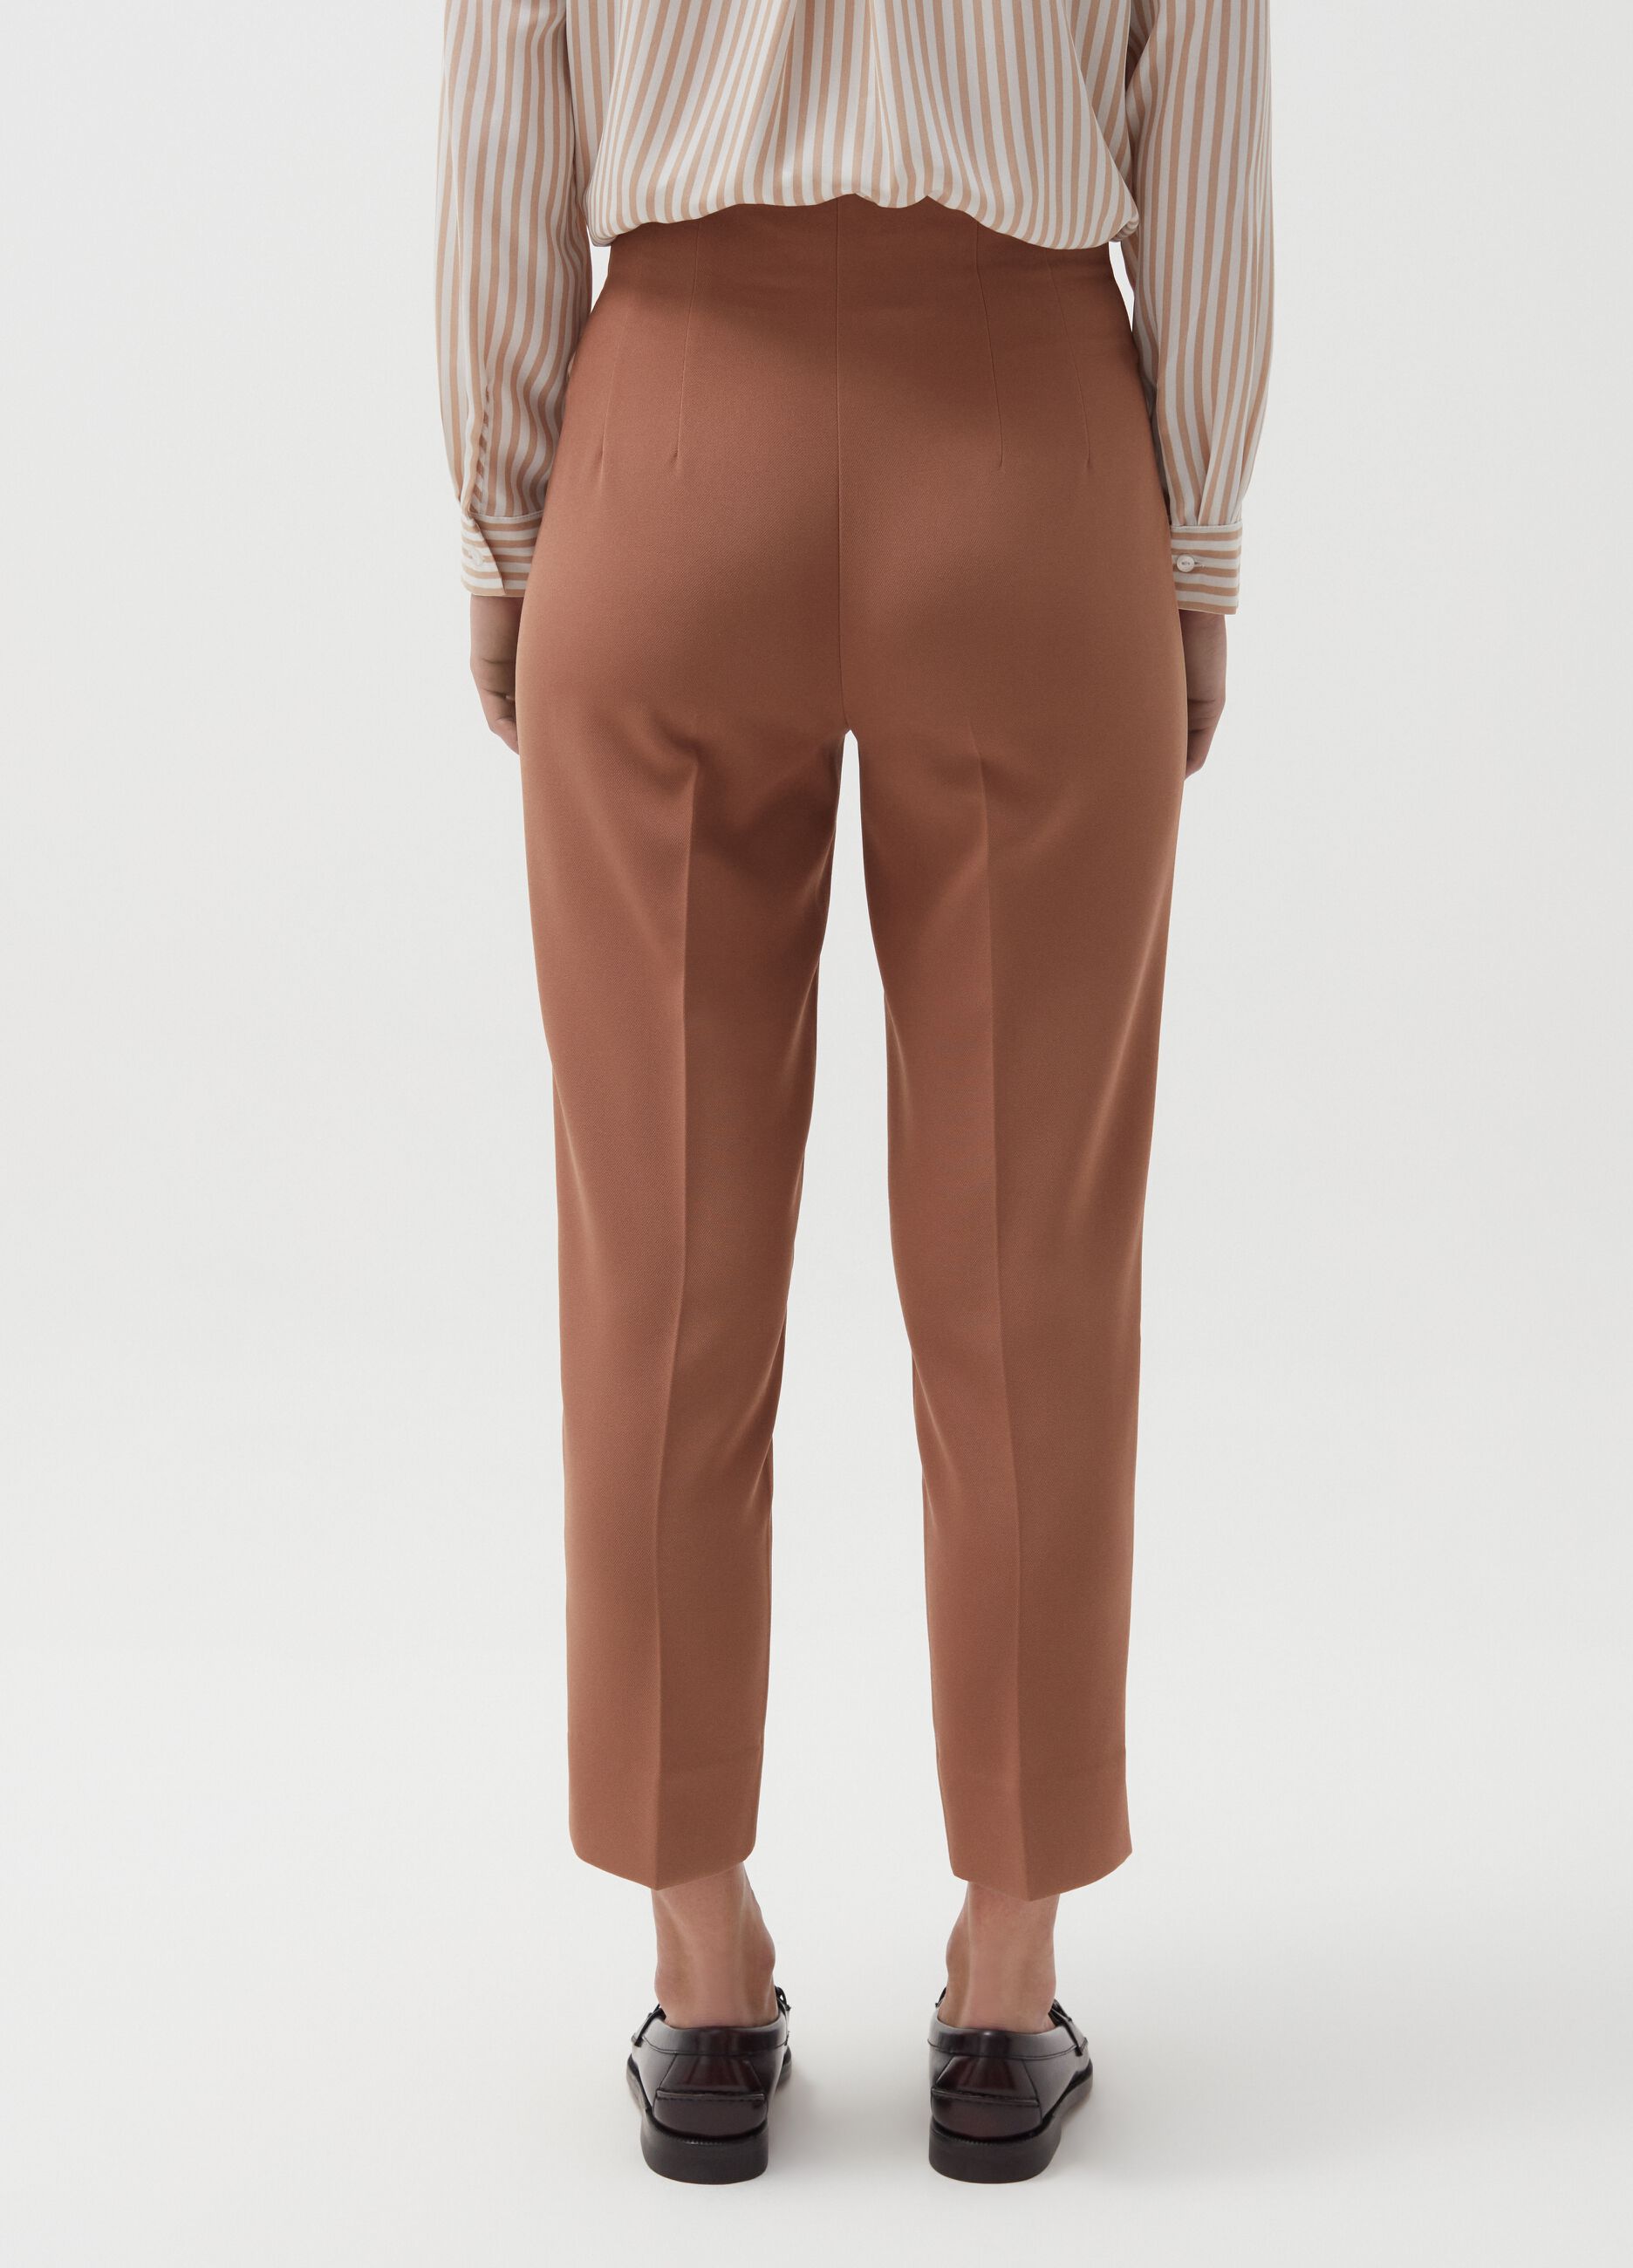 Crop trousers with high waist band